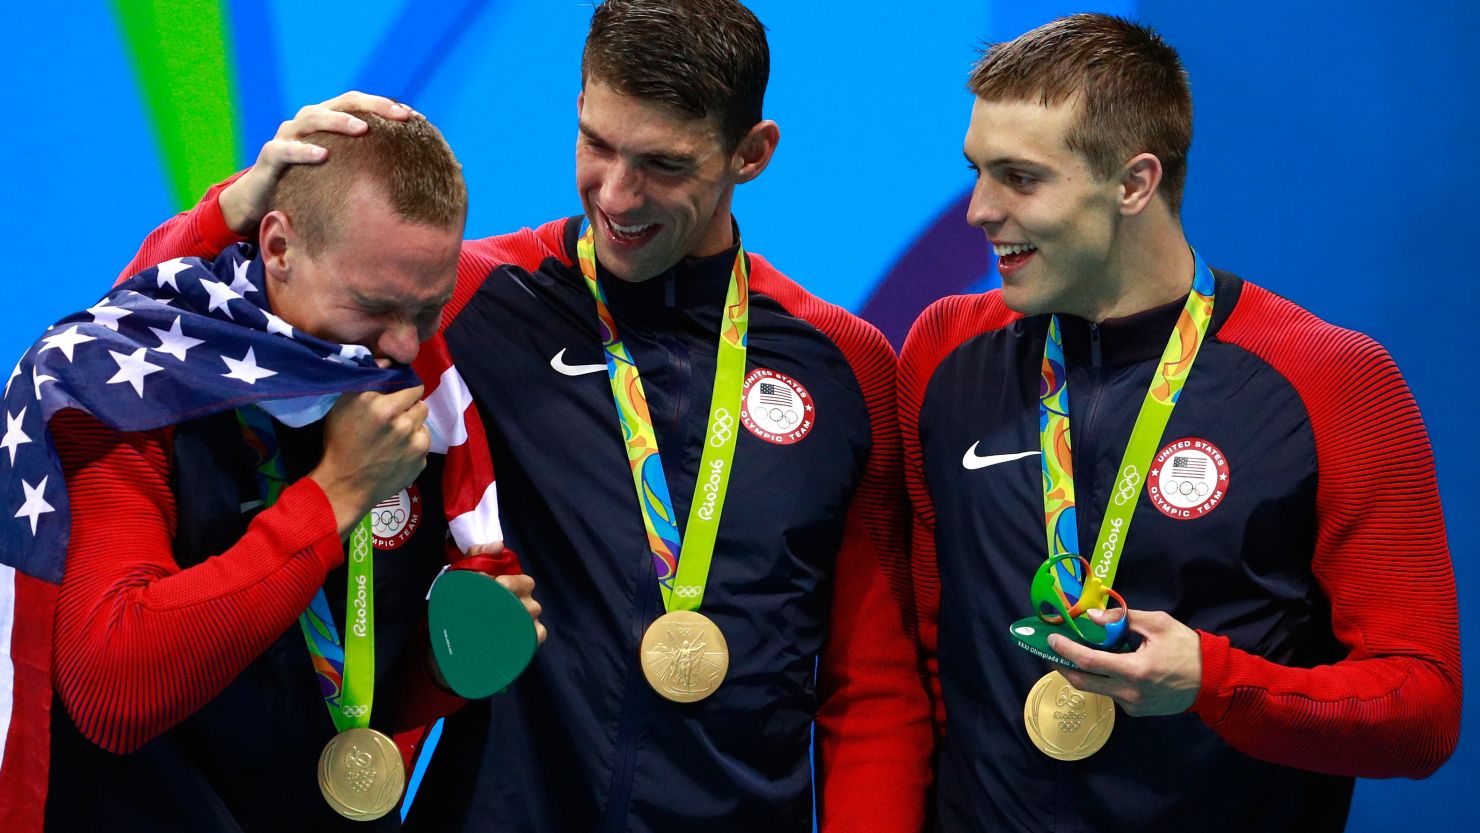 Members of the men's 4 x 100m Freestyle Relay team, including Michael Phelps, with their medal-holders. 